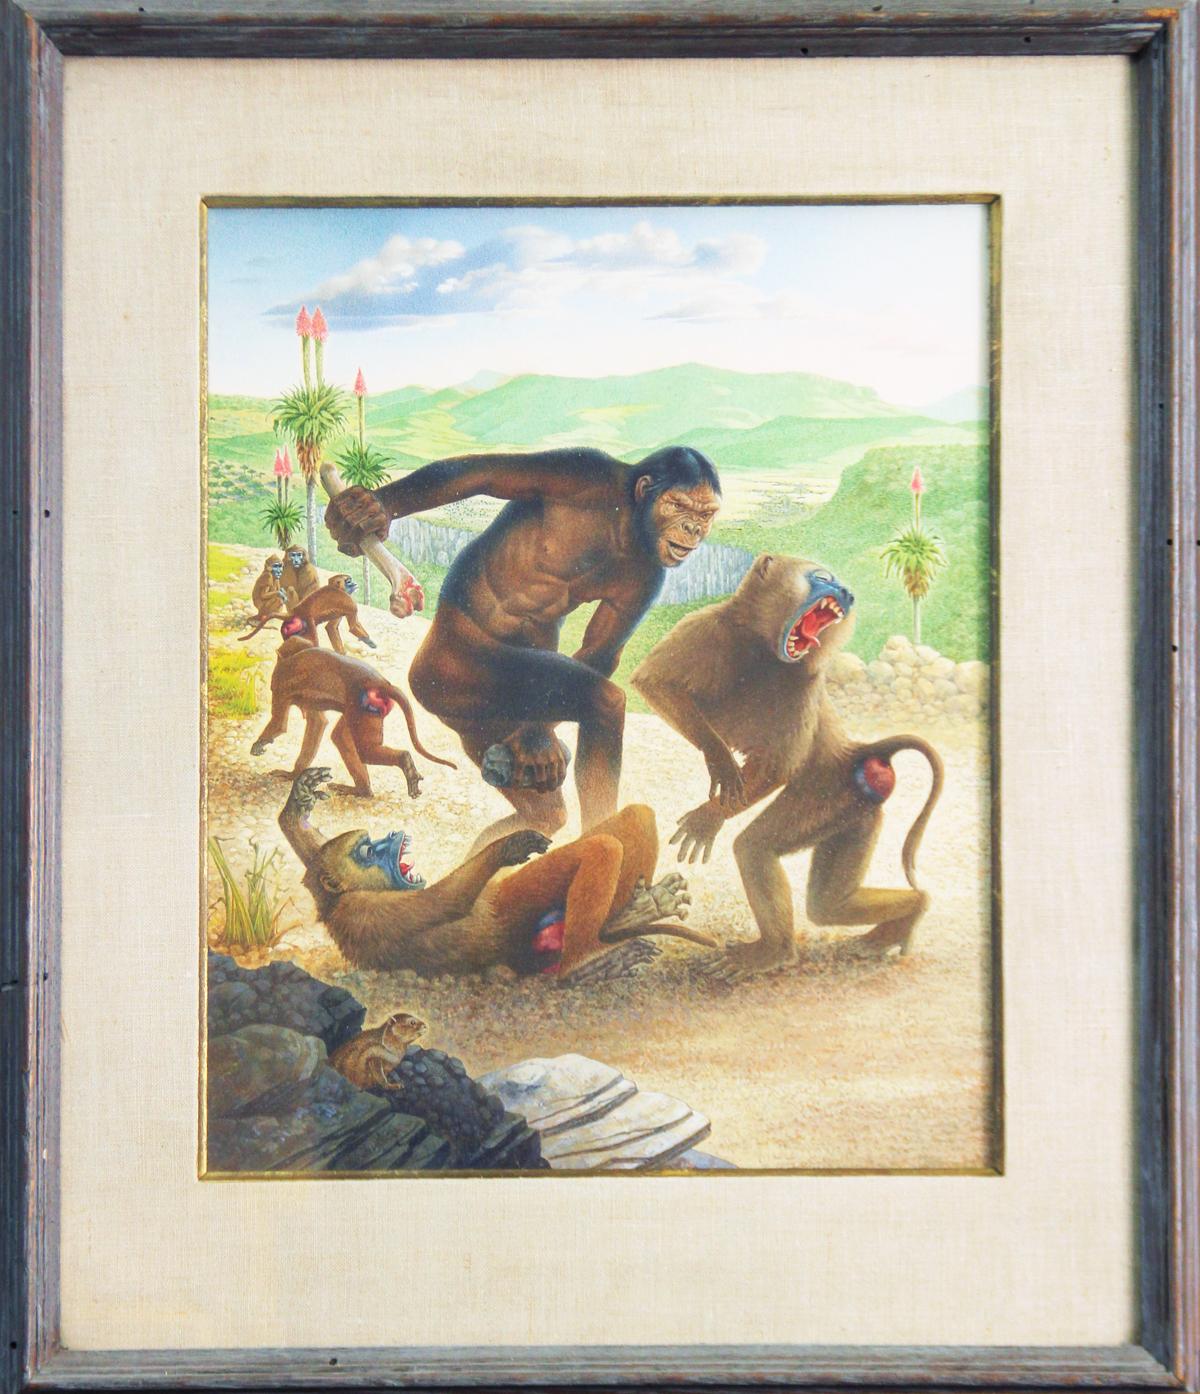 Early Man, 1950's, Mixed Media, Landscape Painted for Wonders of Life on Earth - Mixed Media Art by Rudolf Freund 